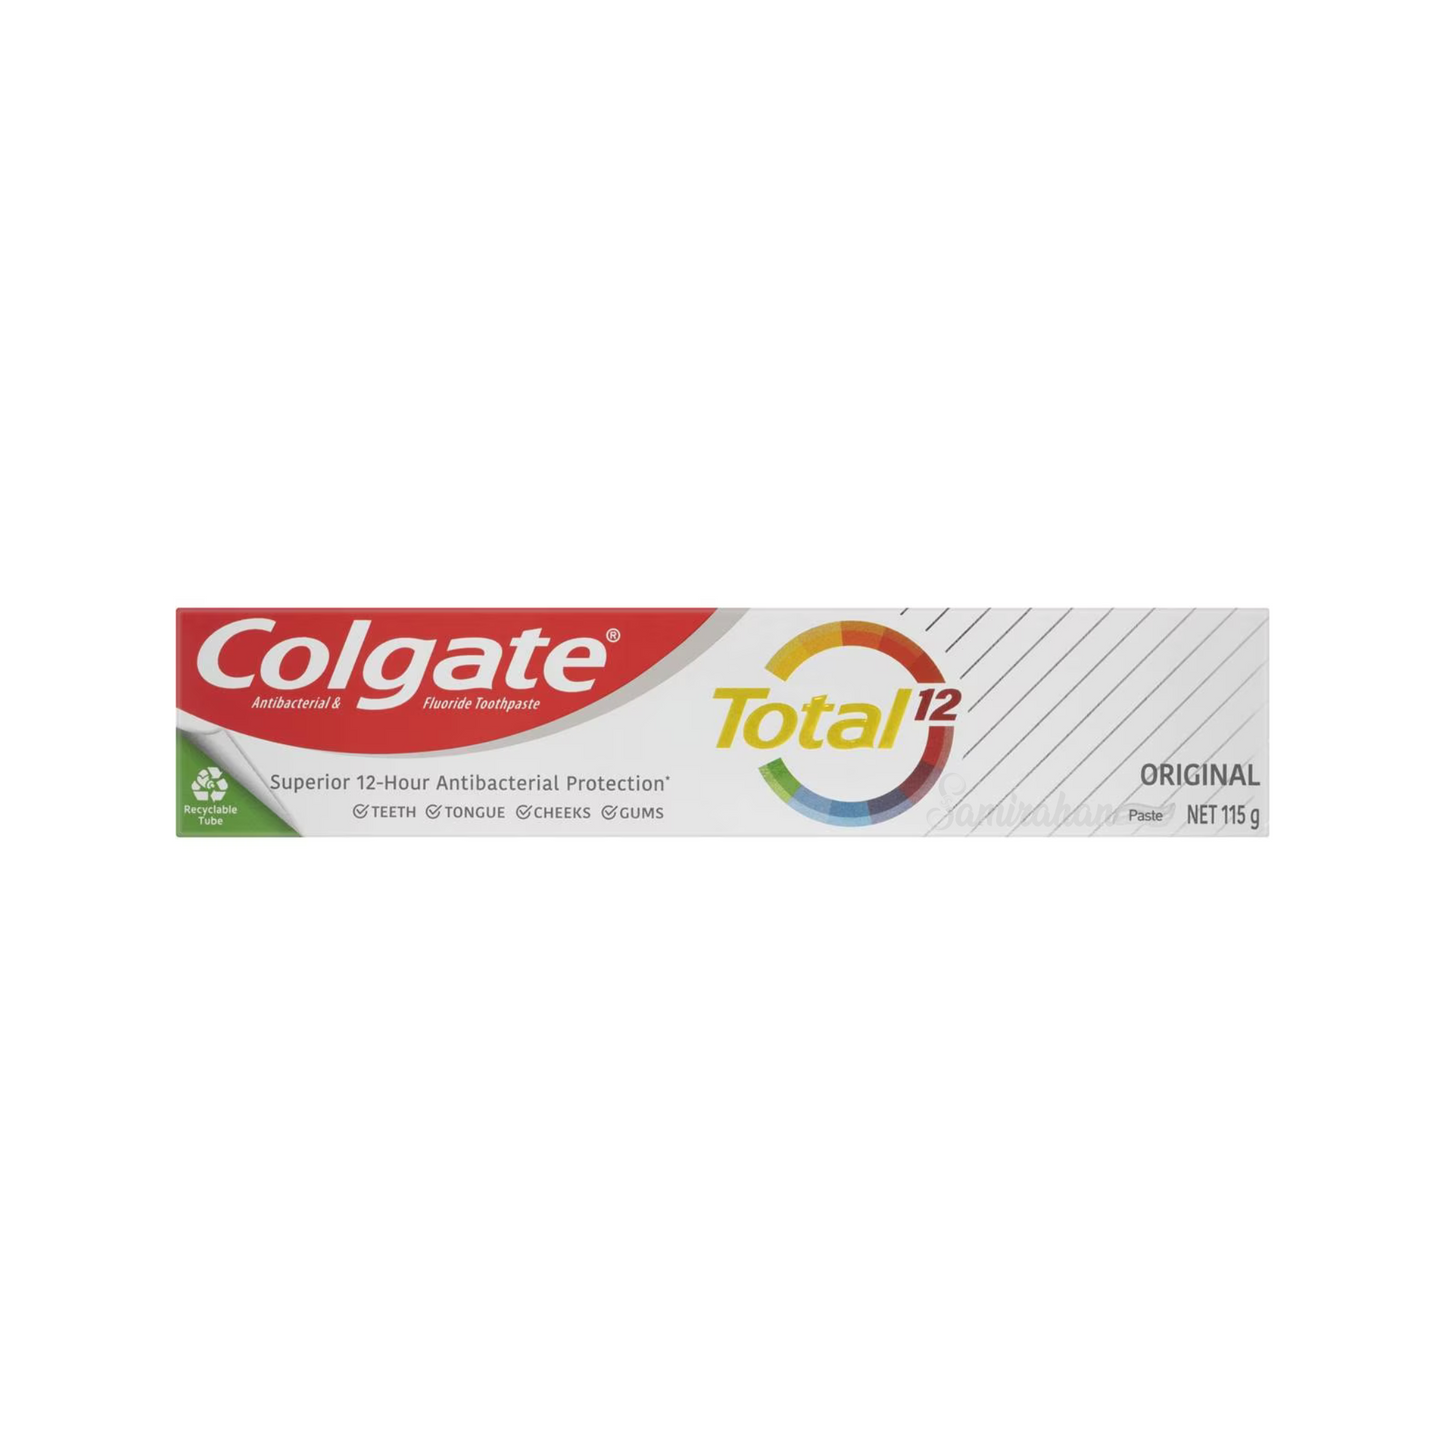 Colgate Total Original Antibacterial Toothpaste is a fluoride, multi benefit toothpaste. Suitable for daily use & reduces bacteria on teeth, tongue, cheeks & gums. Sugar Gluten free. Best genuine authentic imported foreign Australian premium real quality dental health cheap price in Dhaka Chittagong Sylhet Bangladesh.